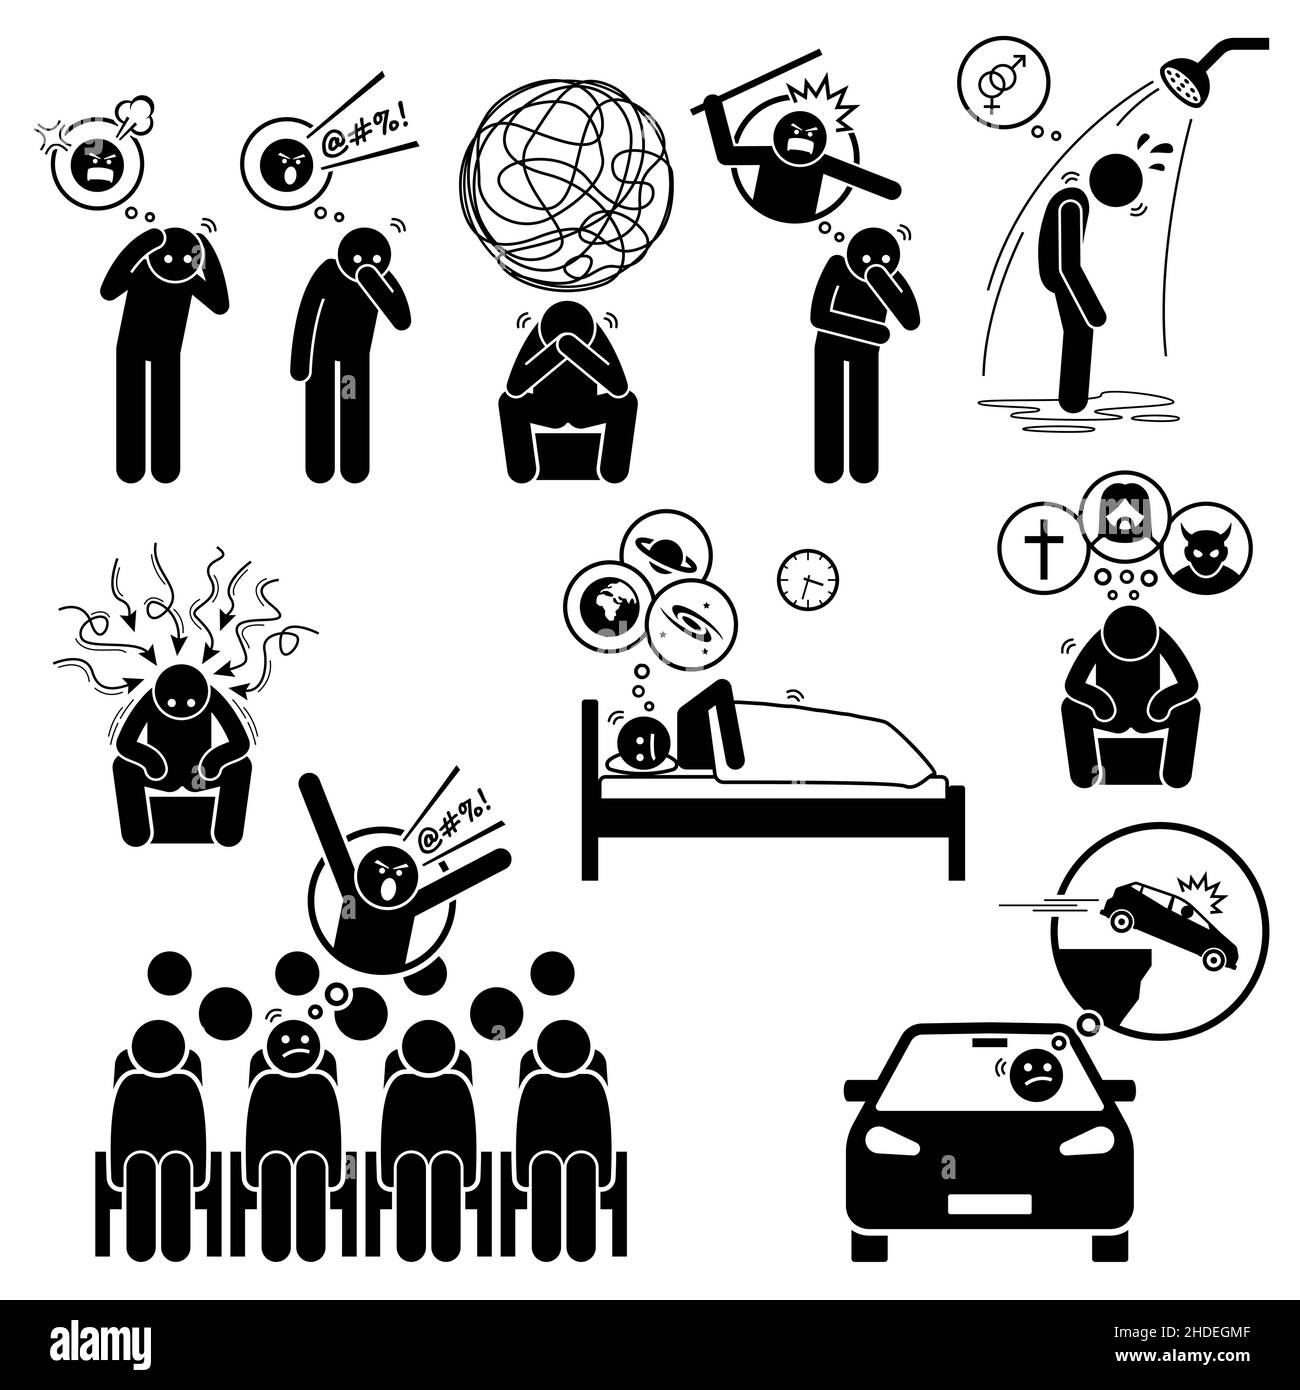 Obsessive compulsive disorder OCD. Ruminations intrusive thoughts Pure O mental disorder. Vector illustrations of people suffering with intrusive thou Stock Vector